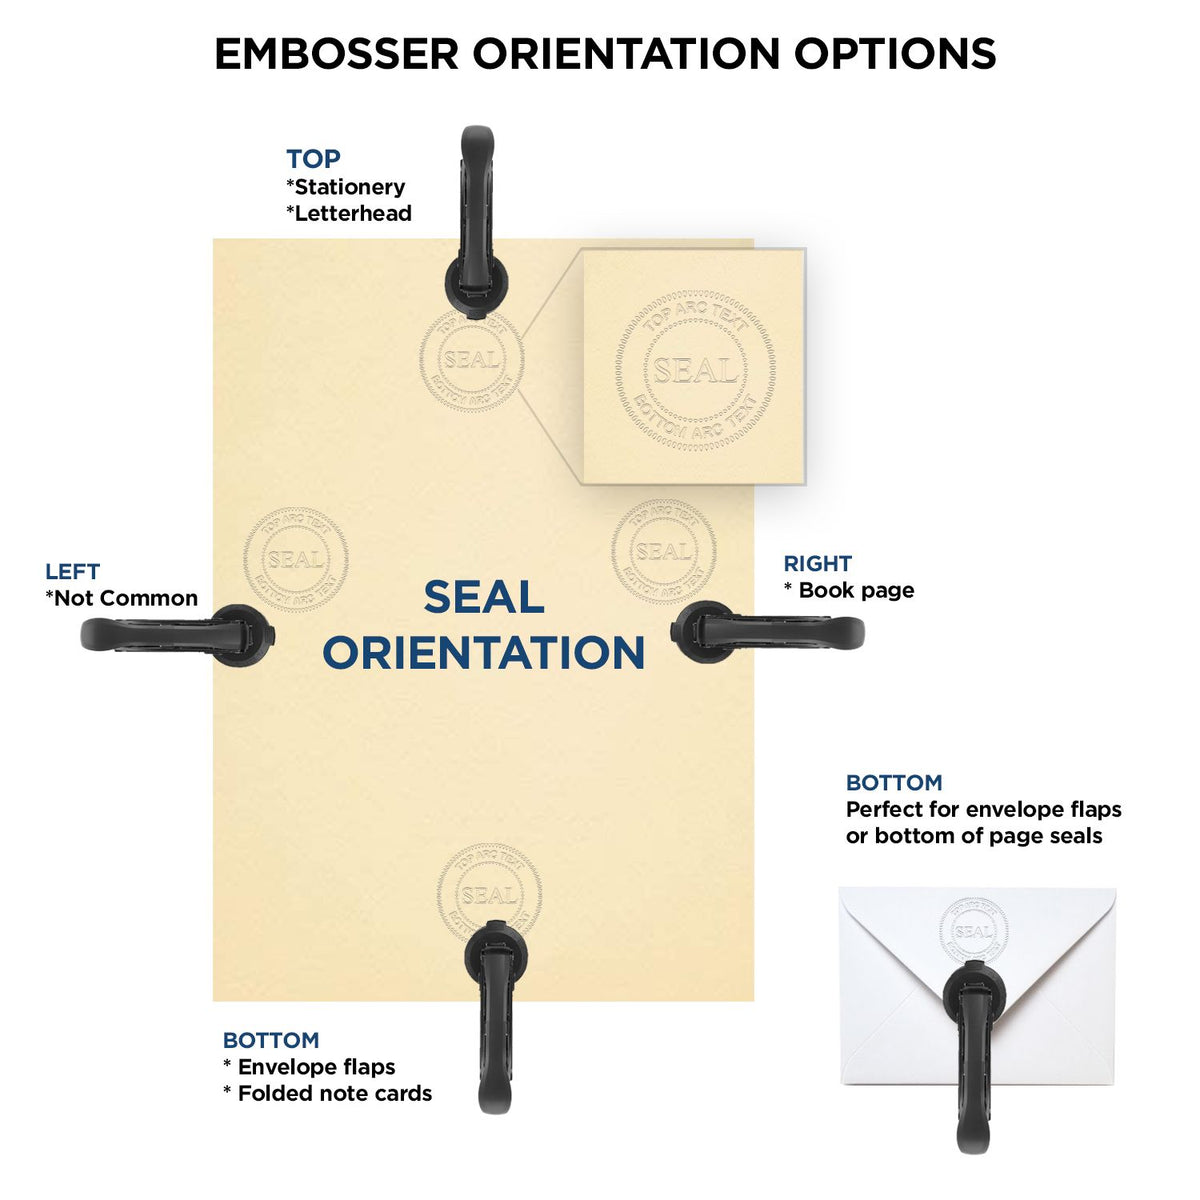 An infographic for the Heavy Duty Cast Iron Indiana Architect Embosser showing embosser orientation, this is showing examples of a top, bottom, right and left insert.